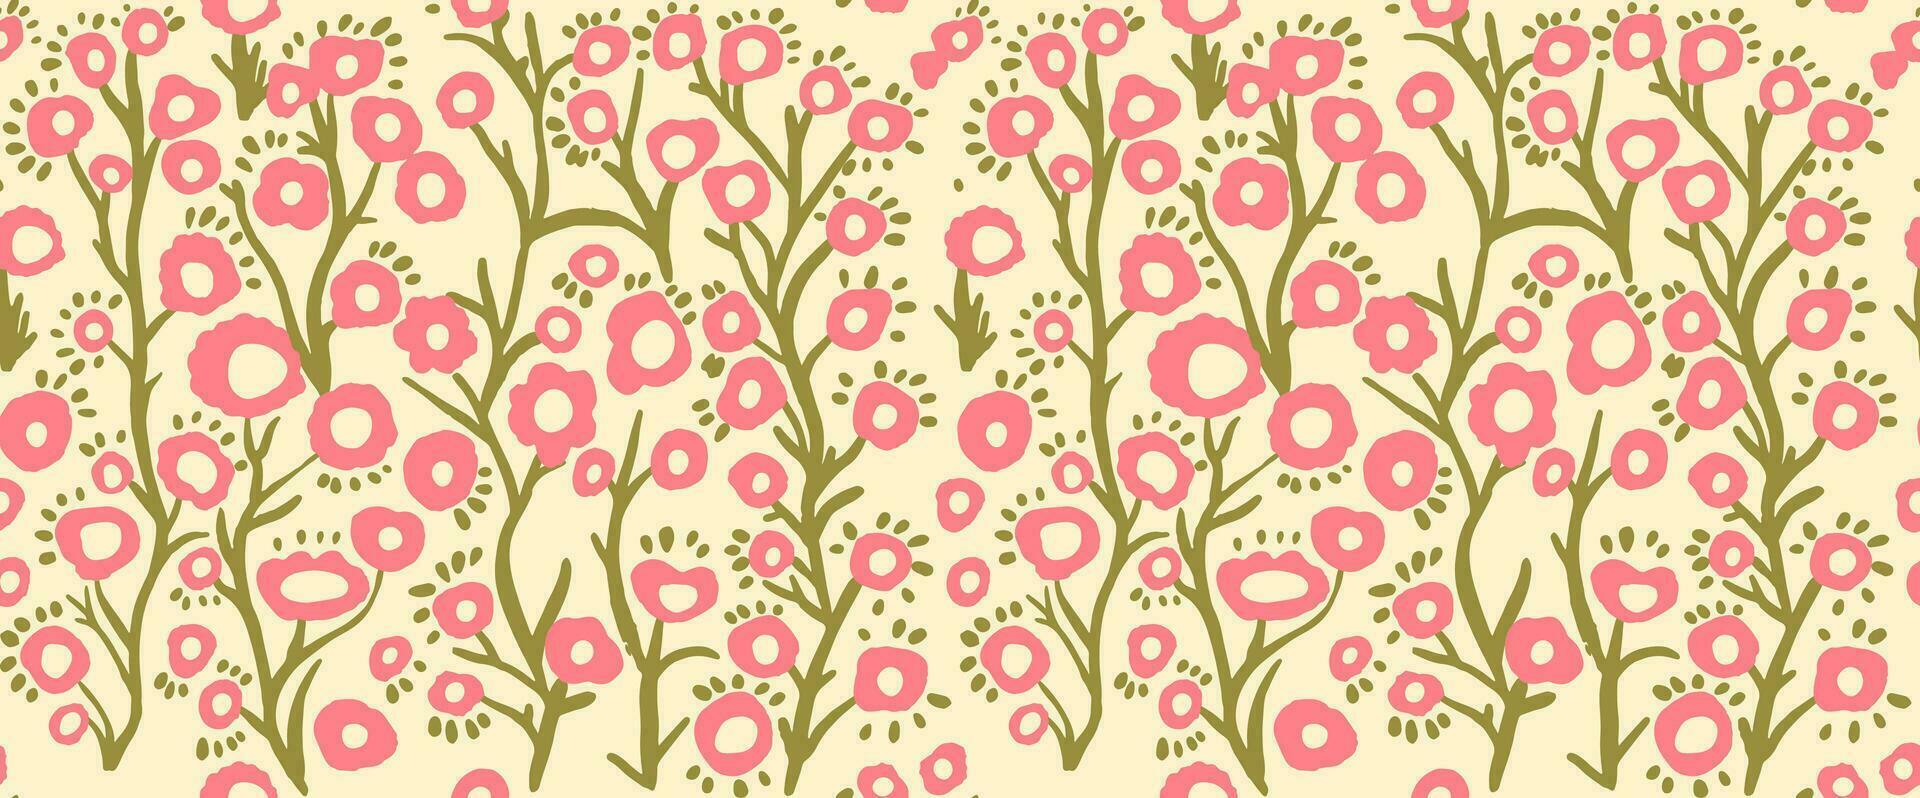 Abstract art of small plant flowers. Seamless background doodle freehand illustration. Organic flowers cartoon background, simple flower shapes in vintage pastel colors. vector